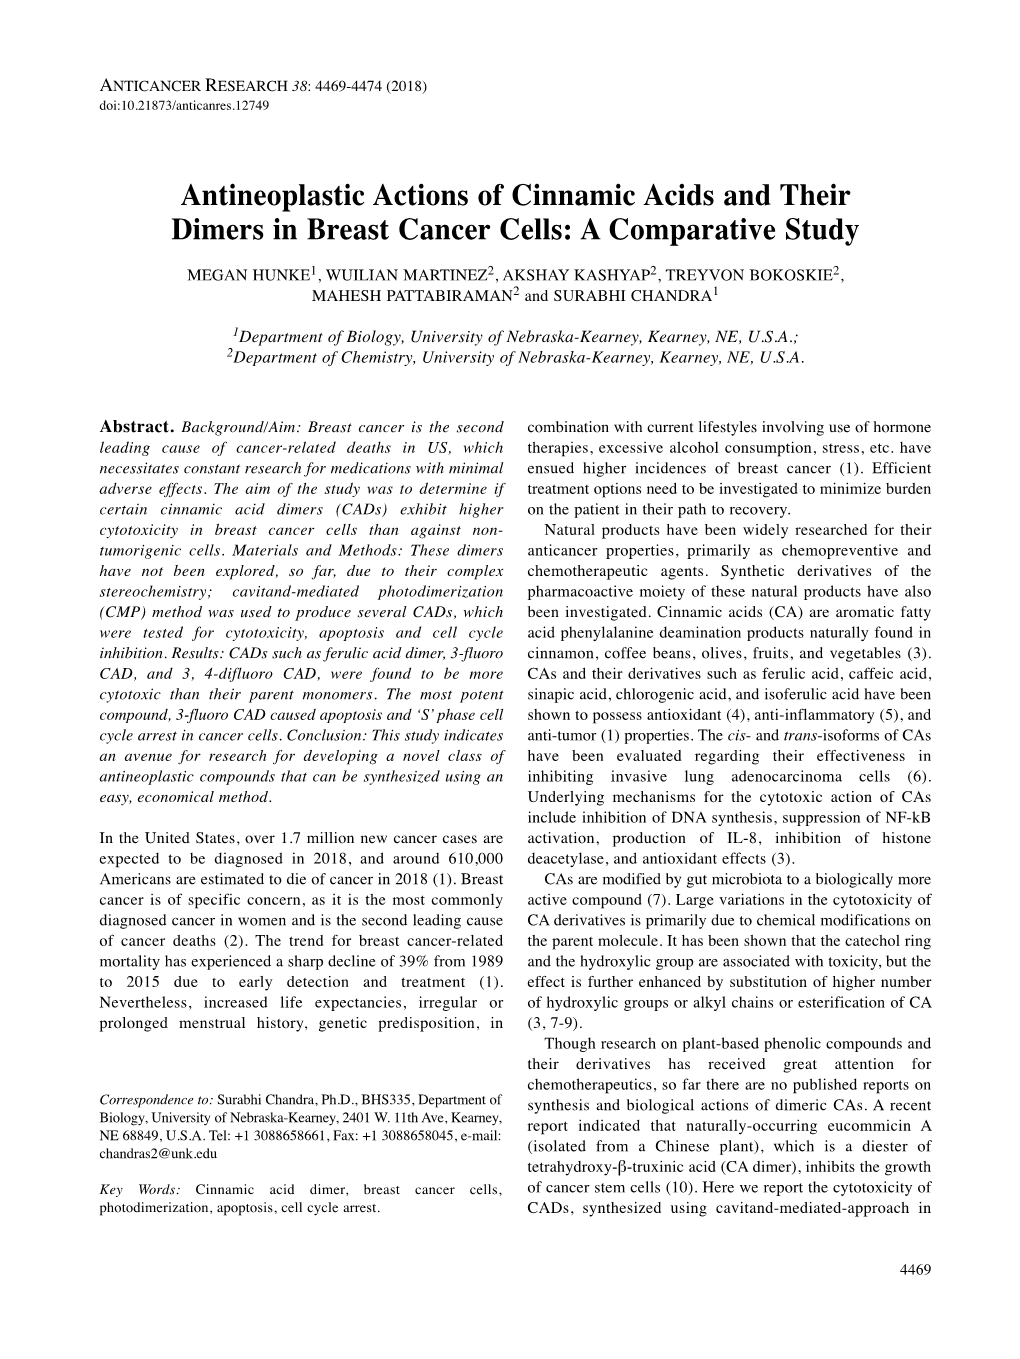 Antineoplastic Actions of Cinnamic Acids and Their Dimers in Breast